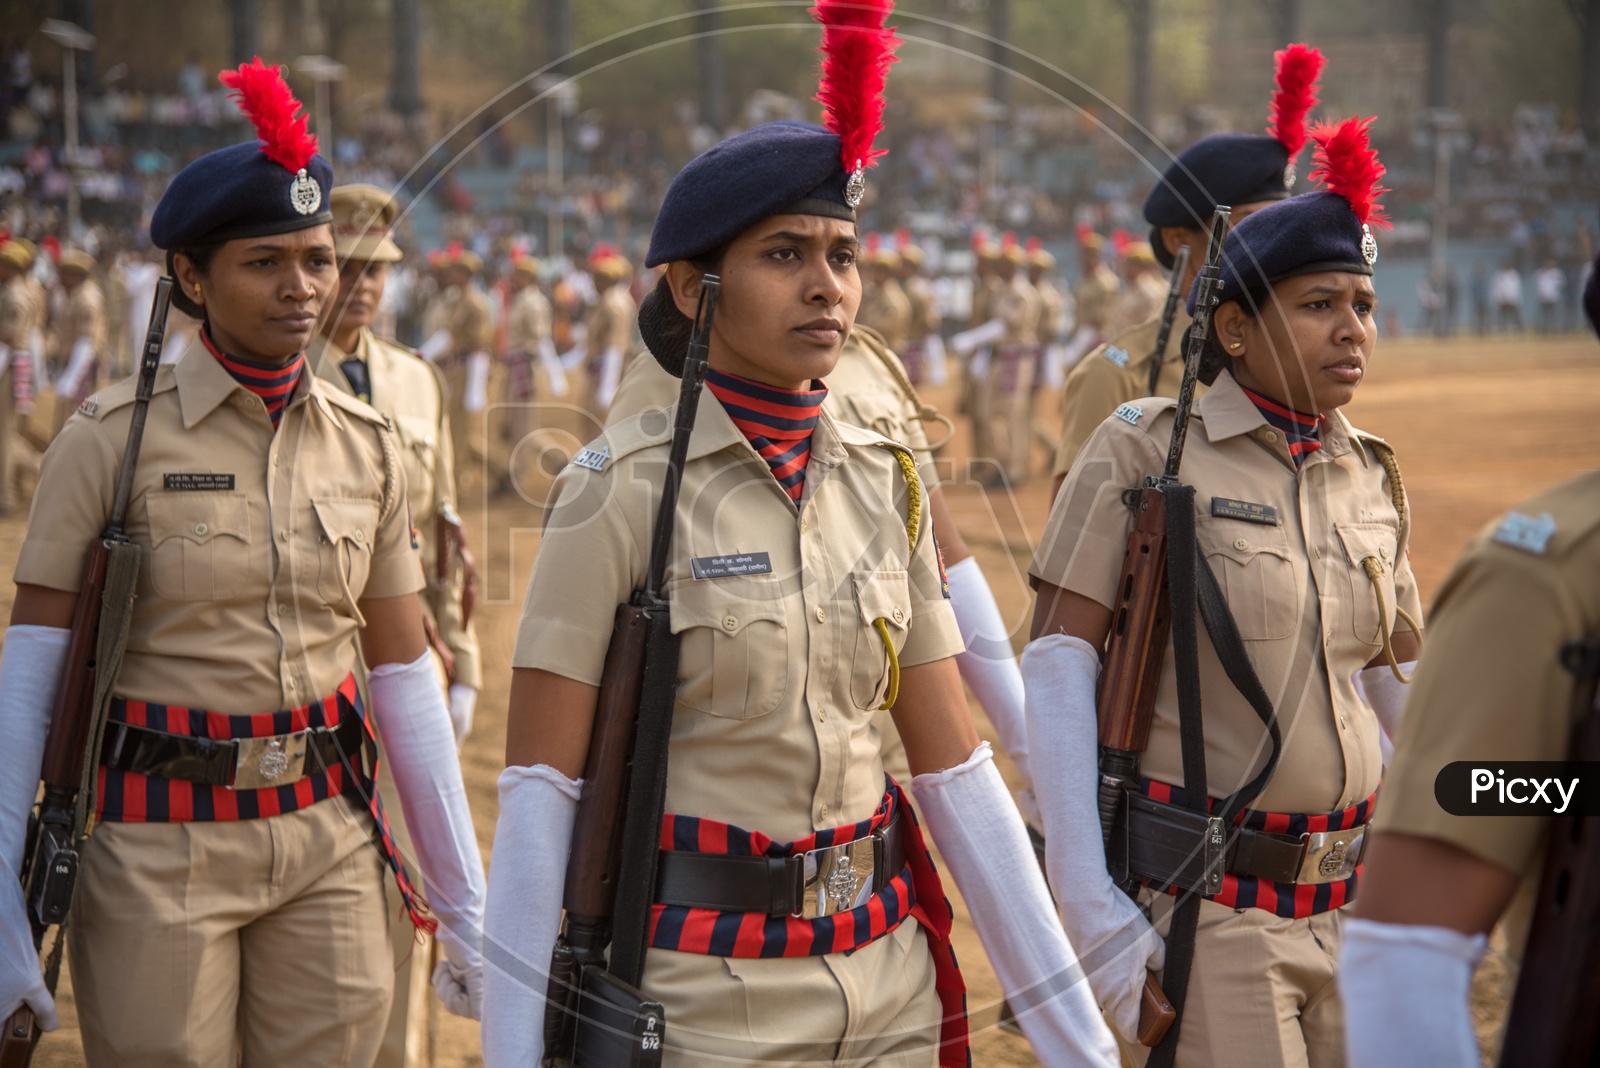 Maharashtra Cadet   Woman Police Marching in Independence Day Parade